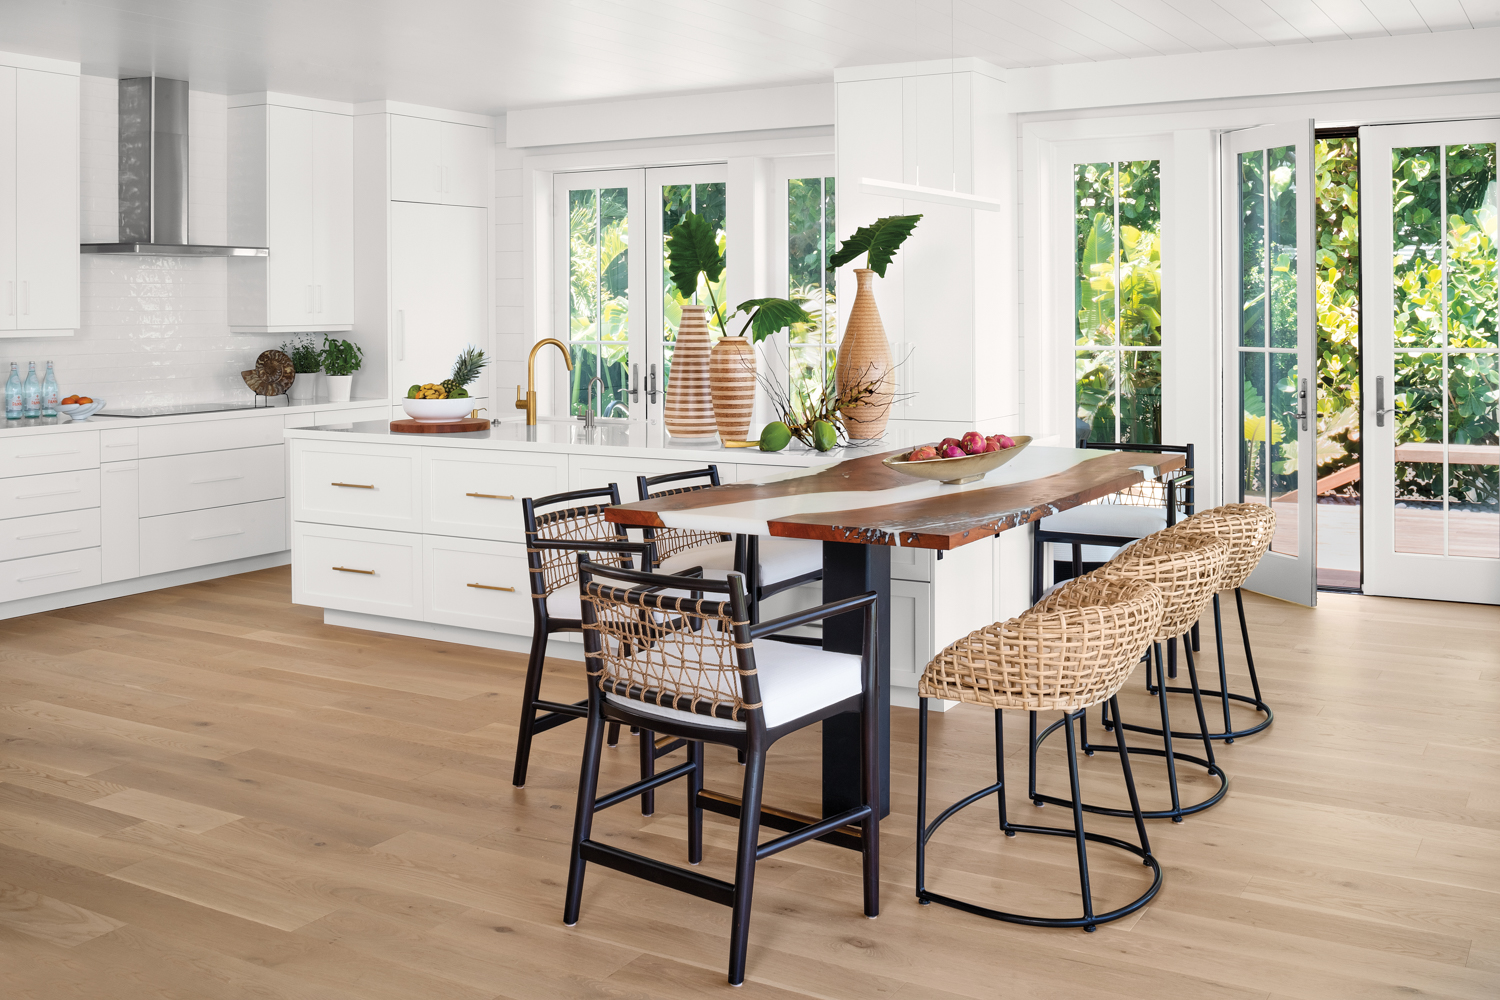 kitchen with white walls and cabinetry, wood flooring, a live-edge table connected to the countertop and two sets of counter stools